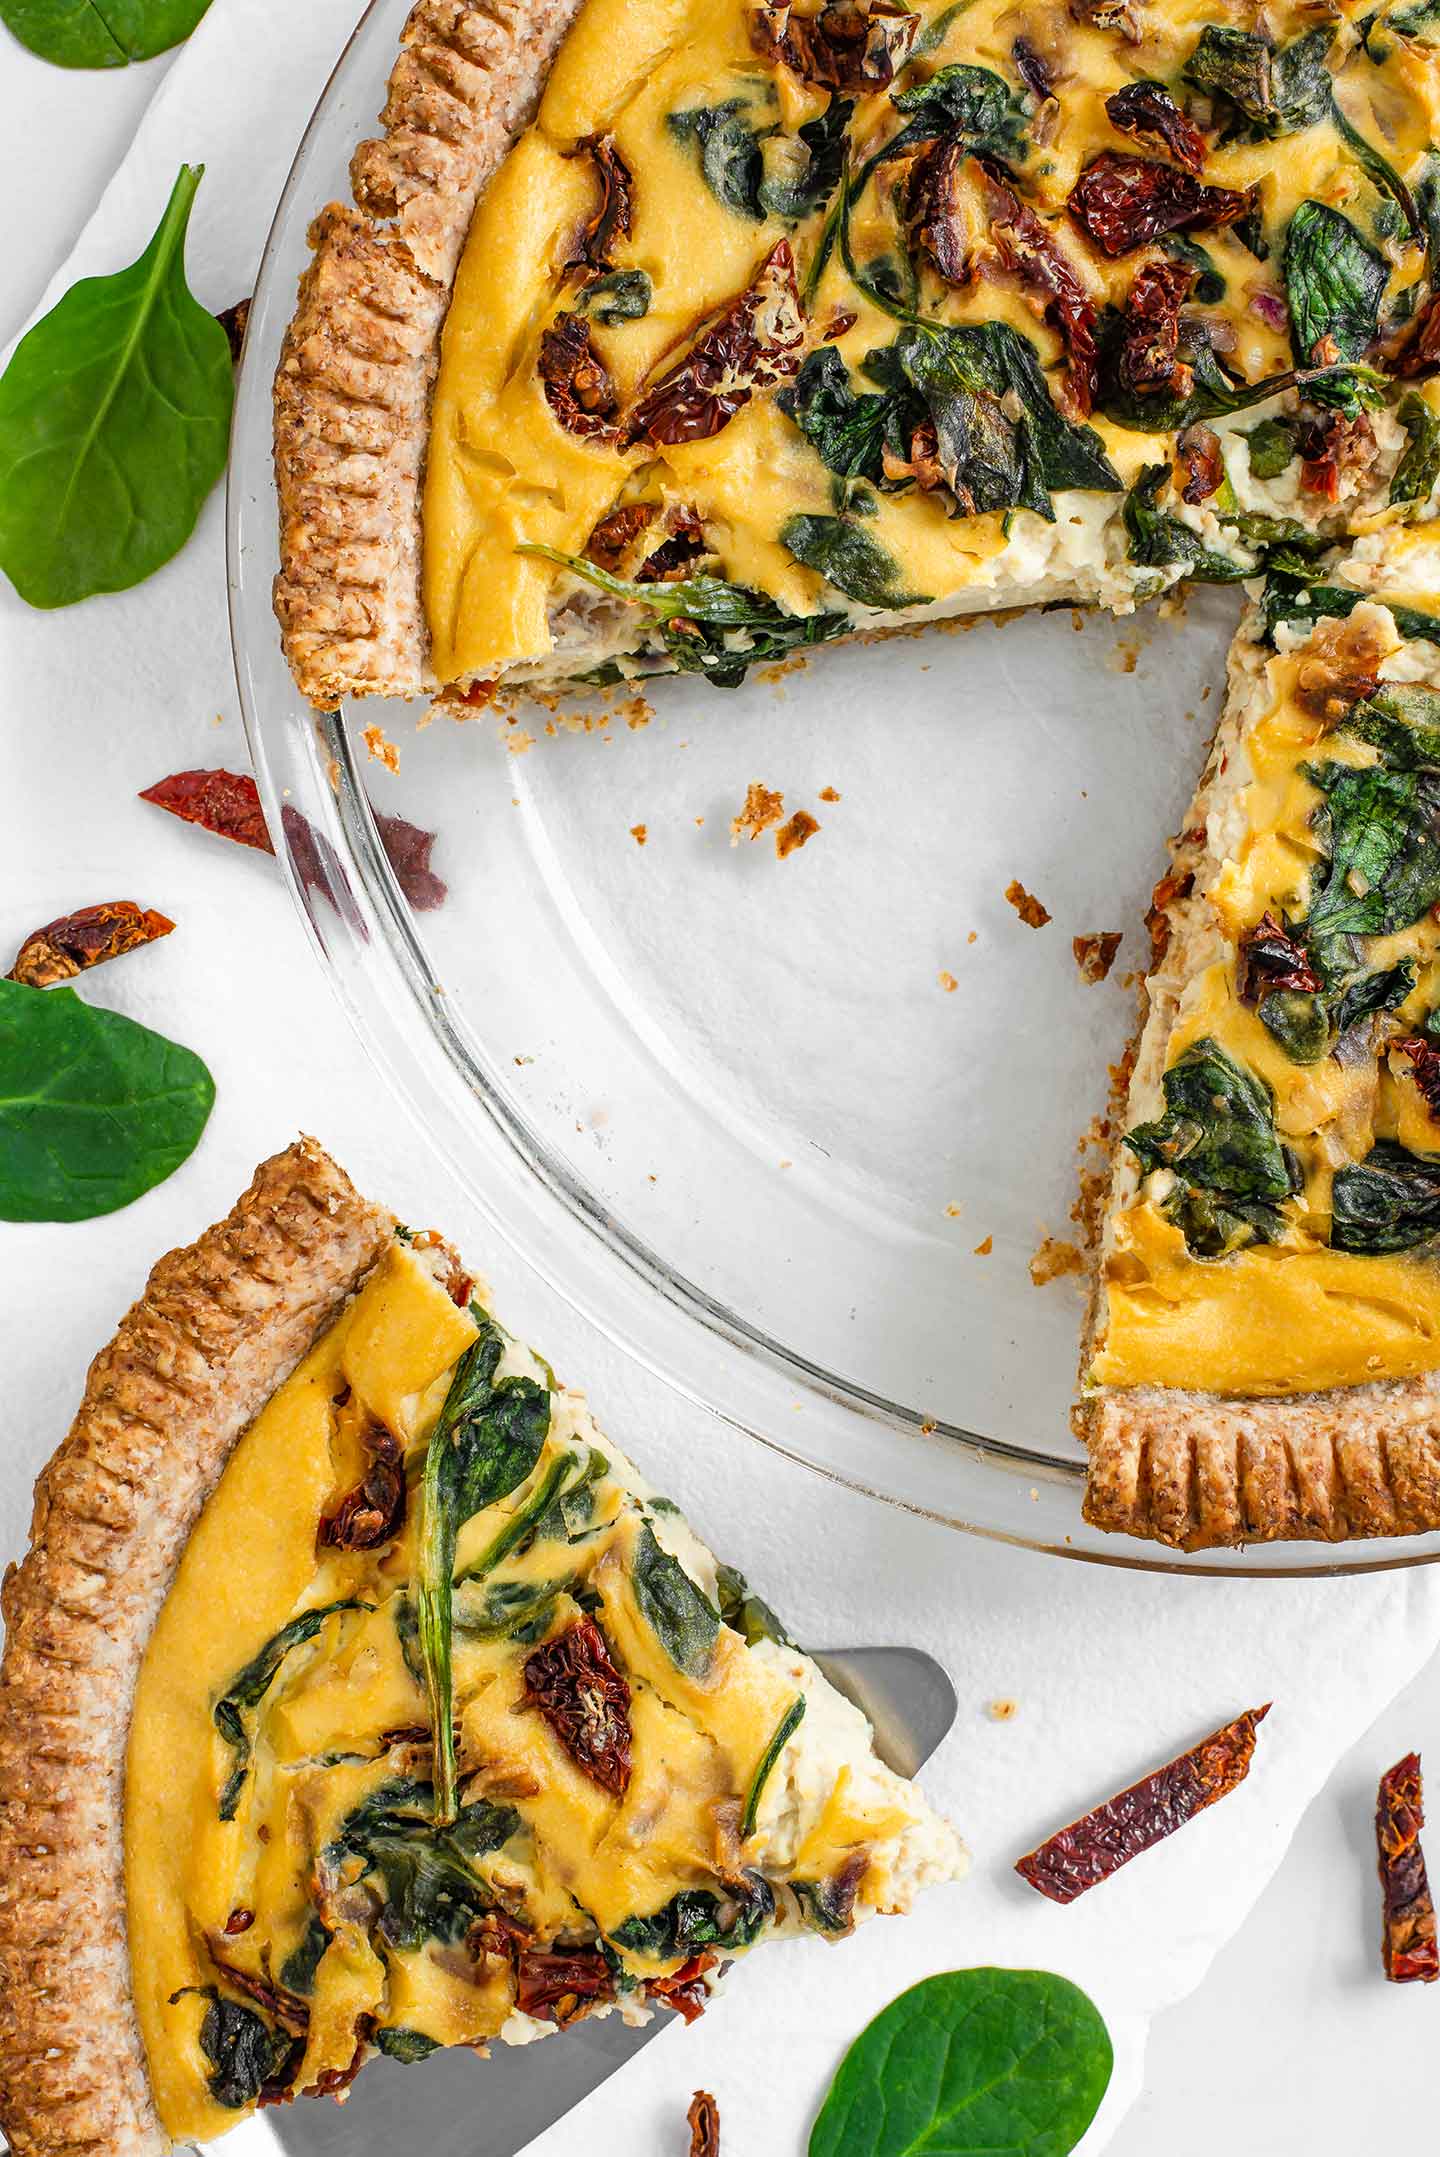 Top down view of simple spinach sun-dried tomato vegan "quiche" with a slice removed from the pie dish and placed on a small plate next to it.